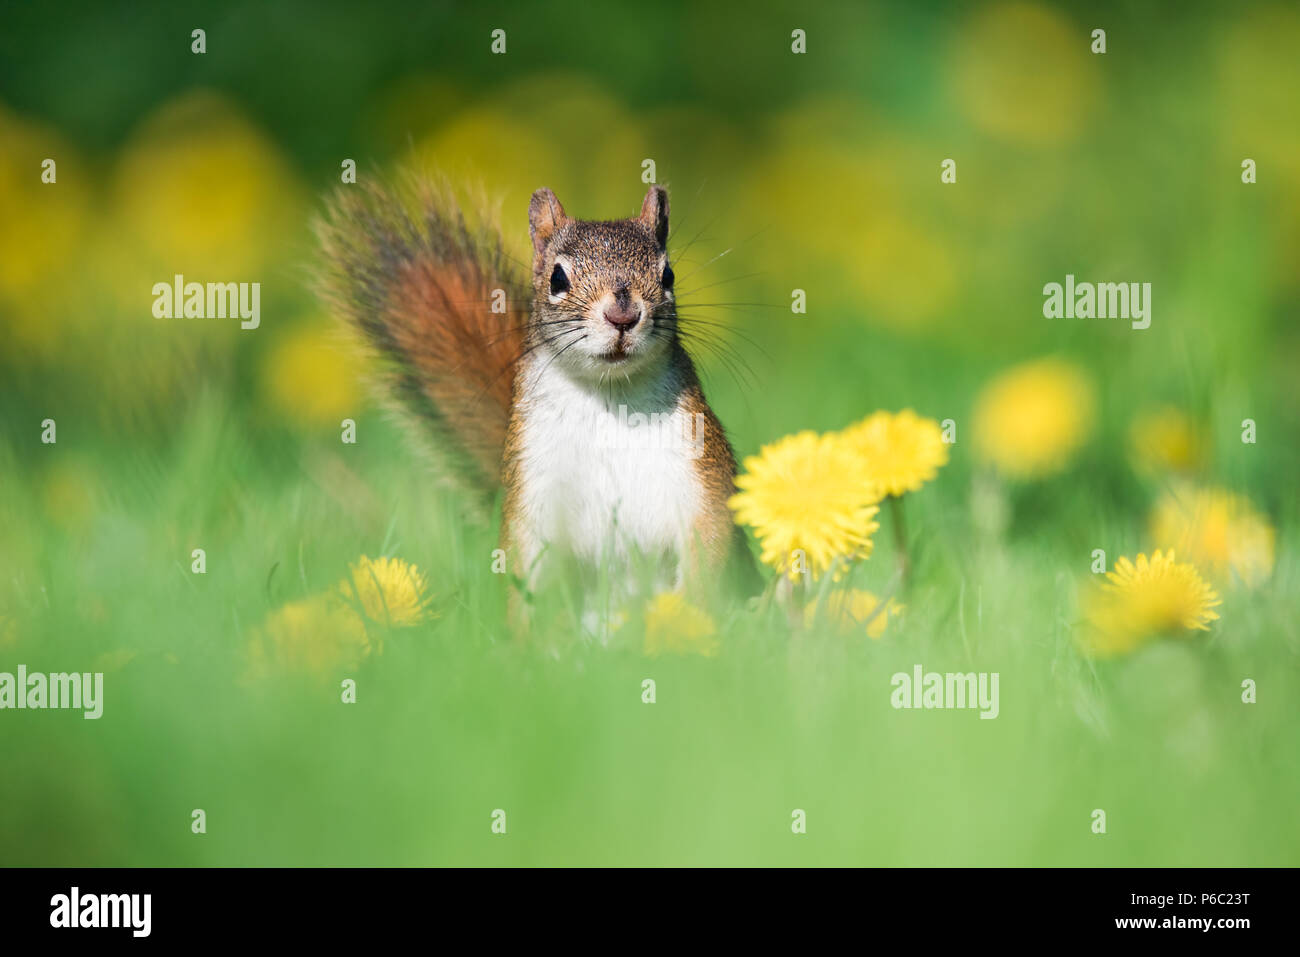 An American Red Squirrel forages for a meal in a dandelion field at Toronto, Ontario's popular Ashbridges Bay Park. Stock Photo